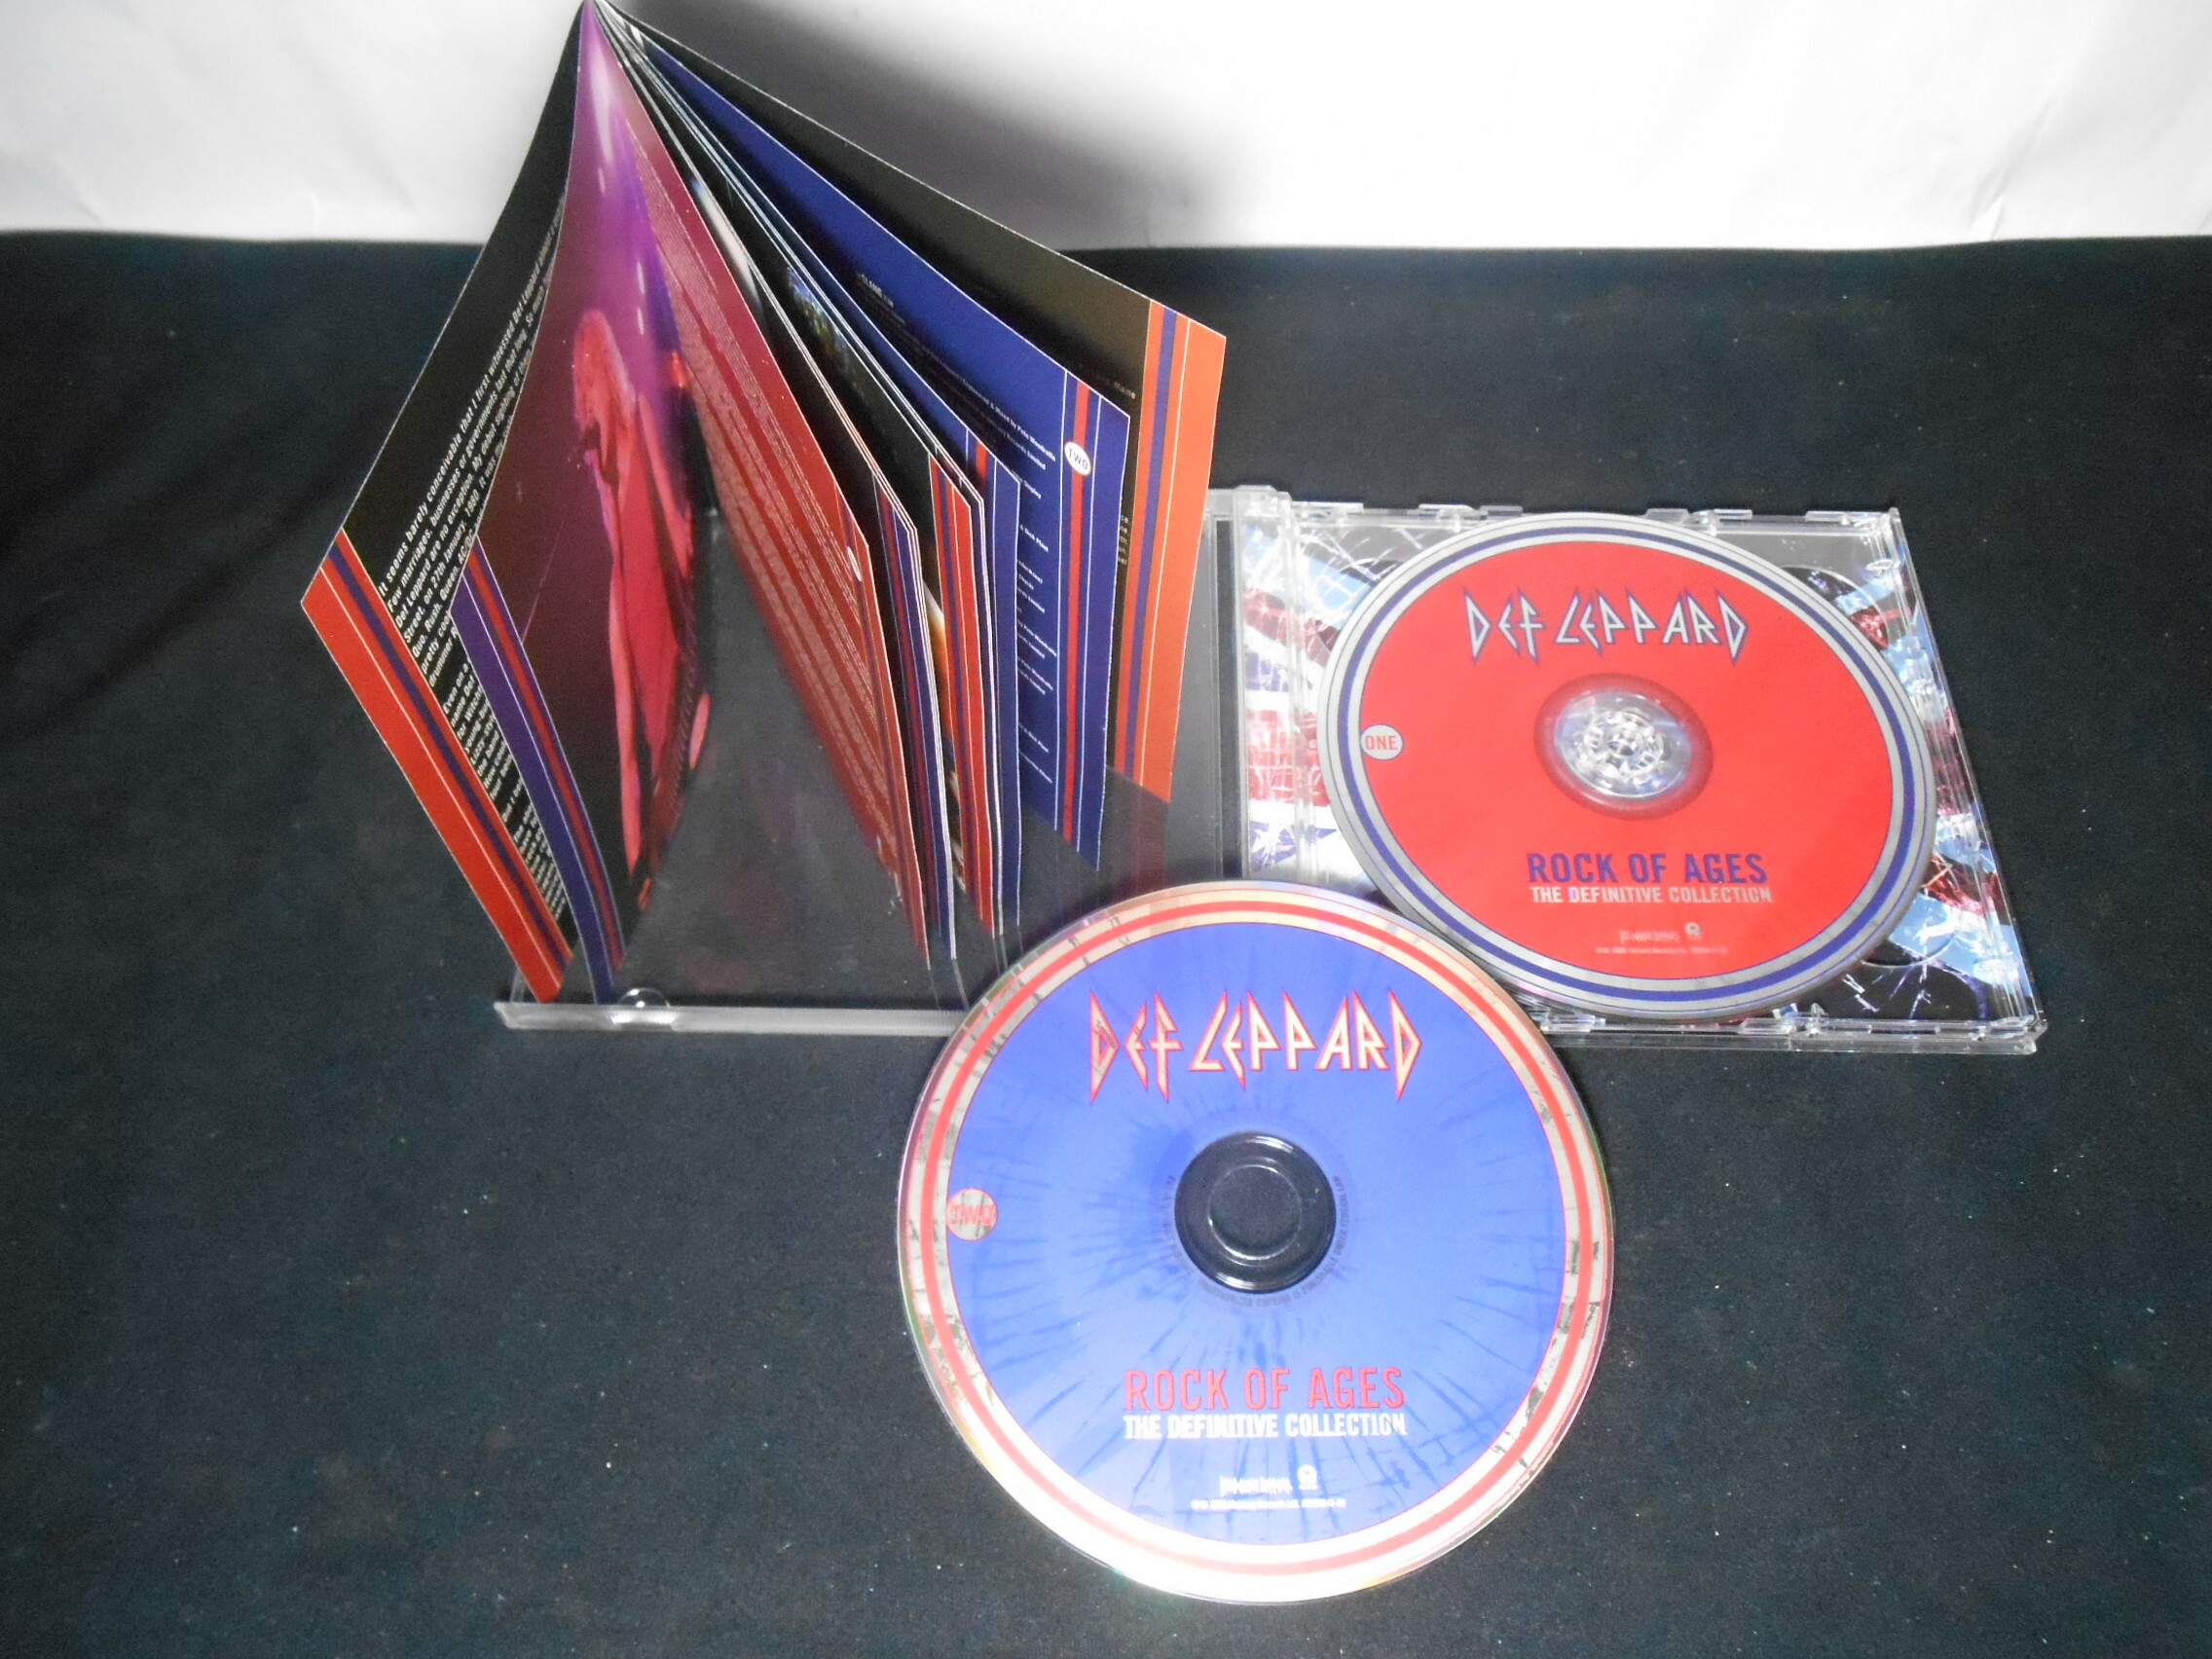 CD - Def Leppard - Rock of Ages the Definitive Collection (Duplo/USA)